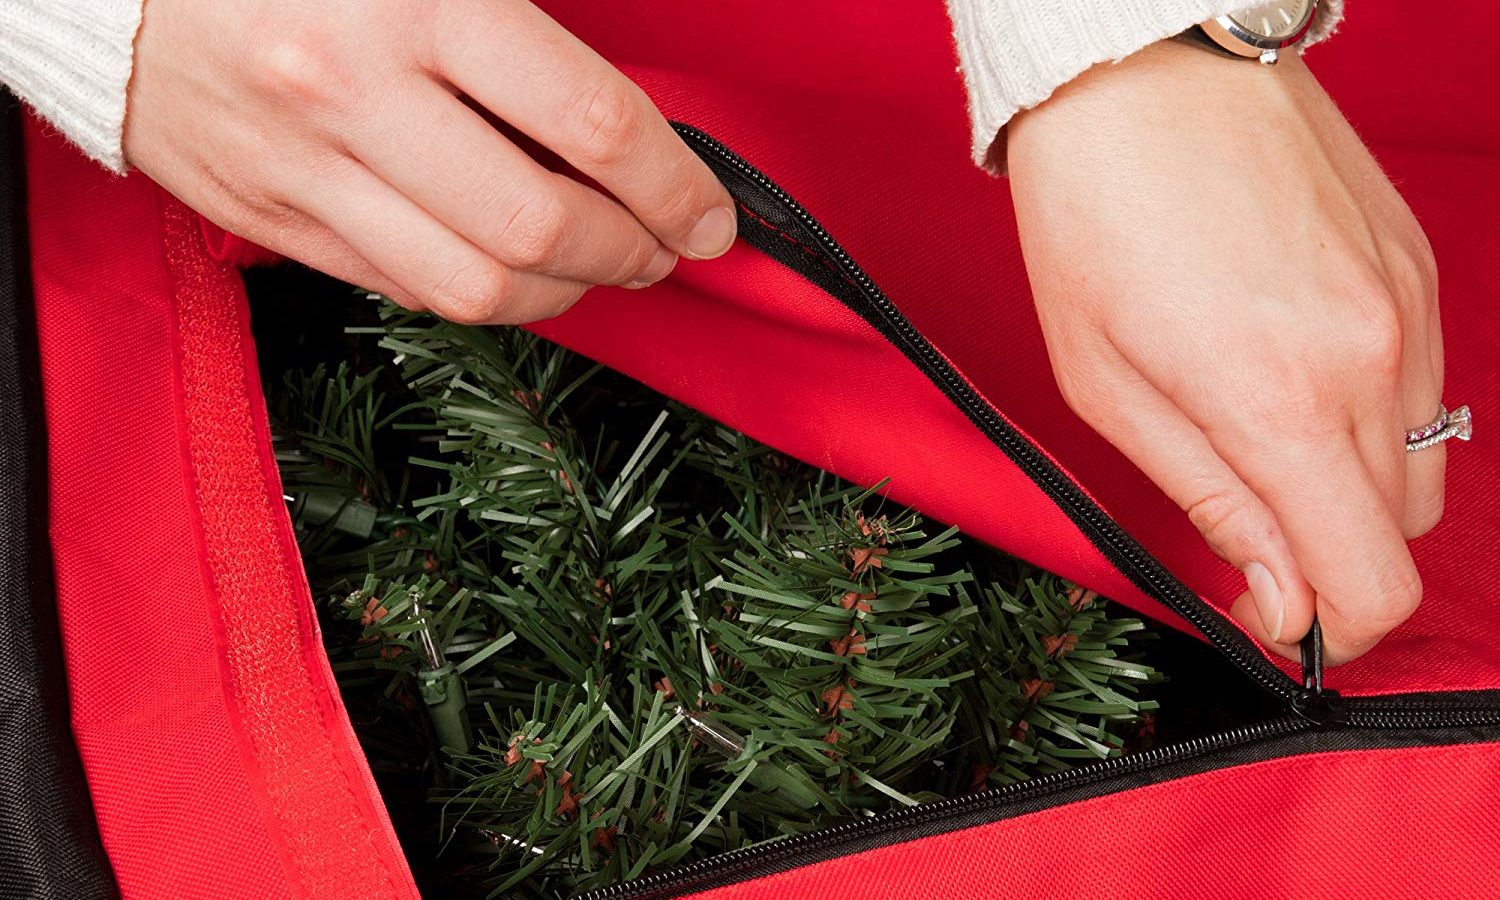 Storing a Christmas tree in a bag